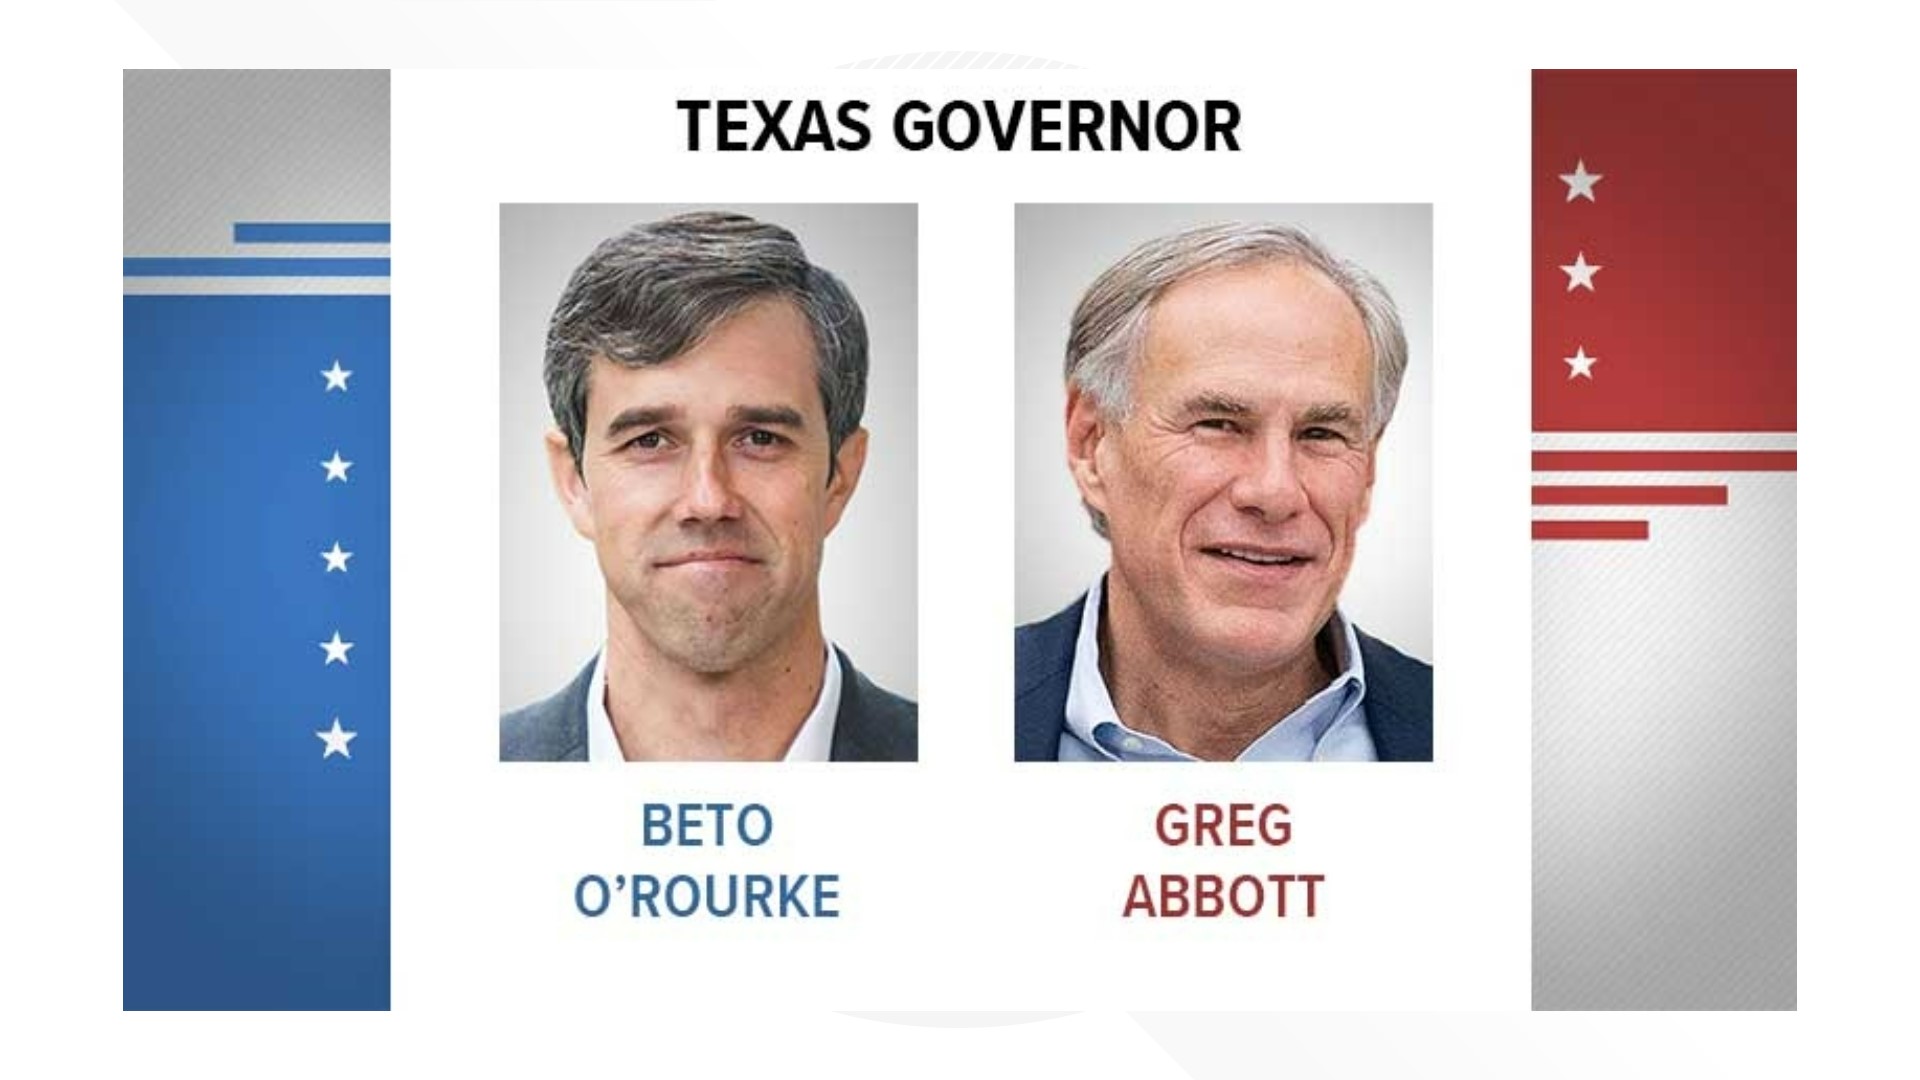 Abbott spoke from South Texas the night of Nov. 8 shortly after multiple outlets projected he would beat O'Rourke.